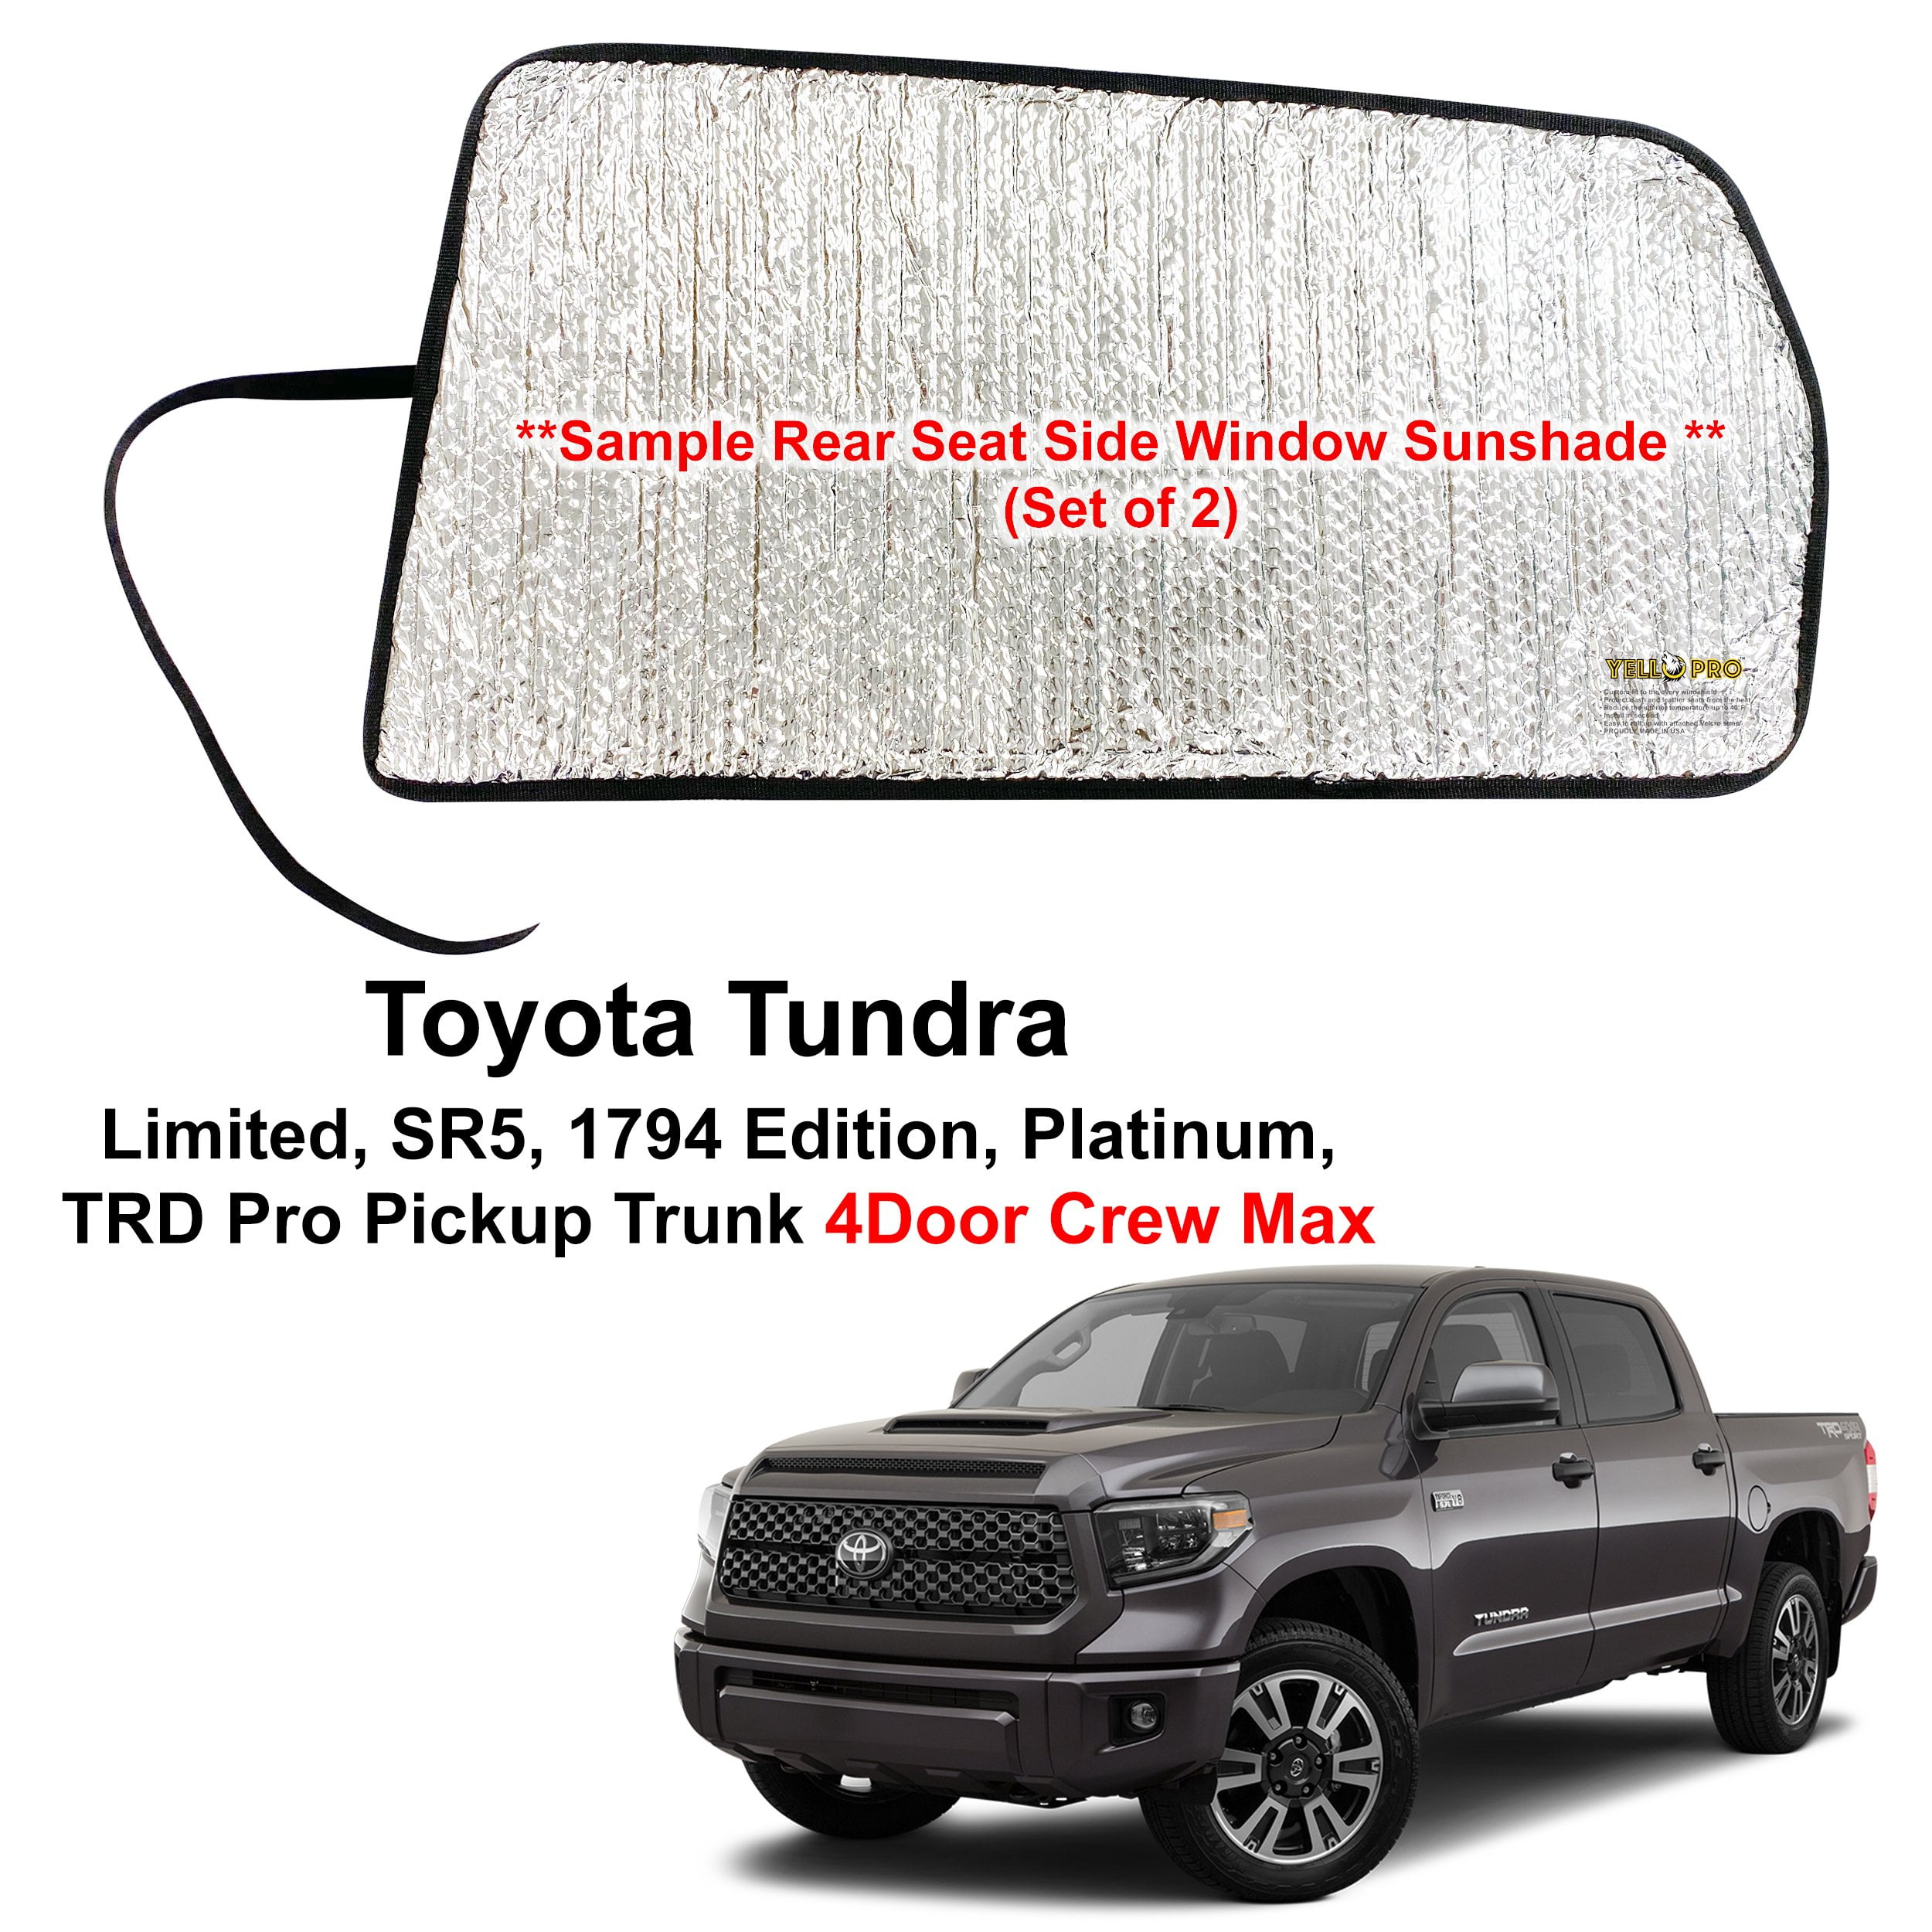 NAGD Passenger/Right Side Rear Door Window Privacy Glass Replacement for Toyota Tundra Pickup 4 Door Crew Cab 2007-2020 